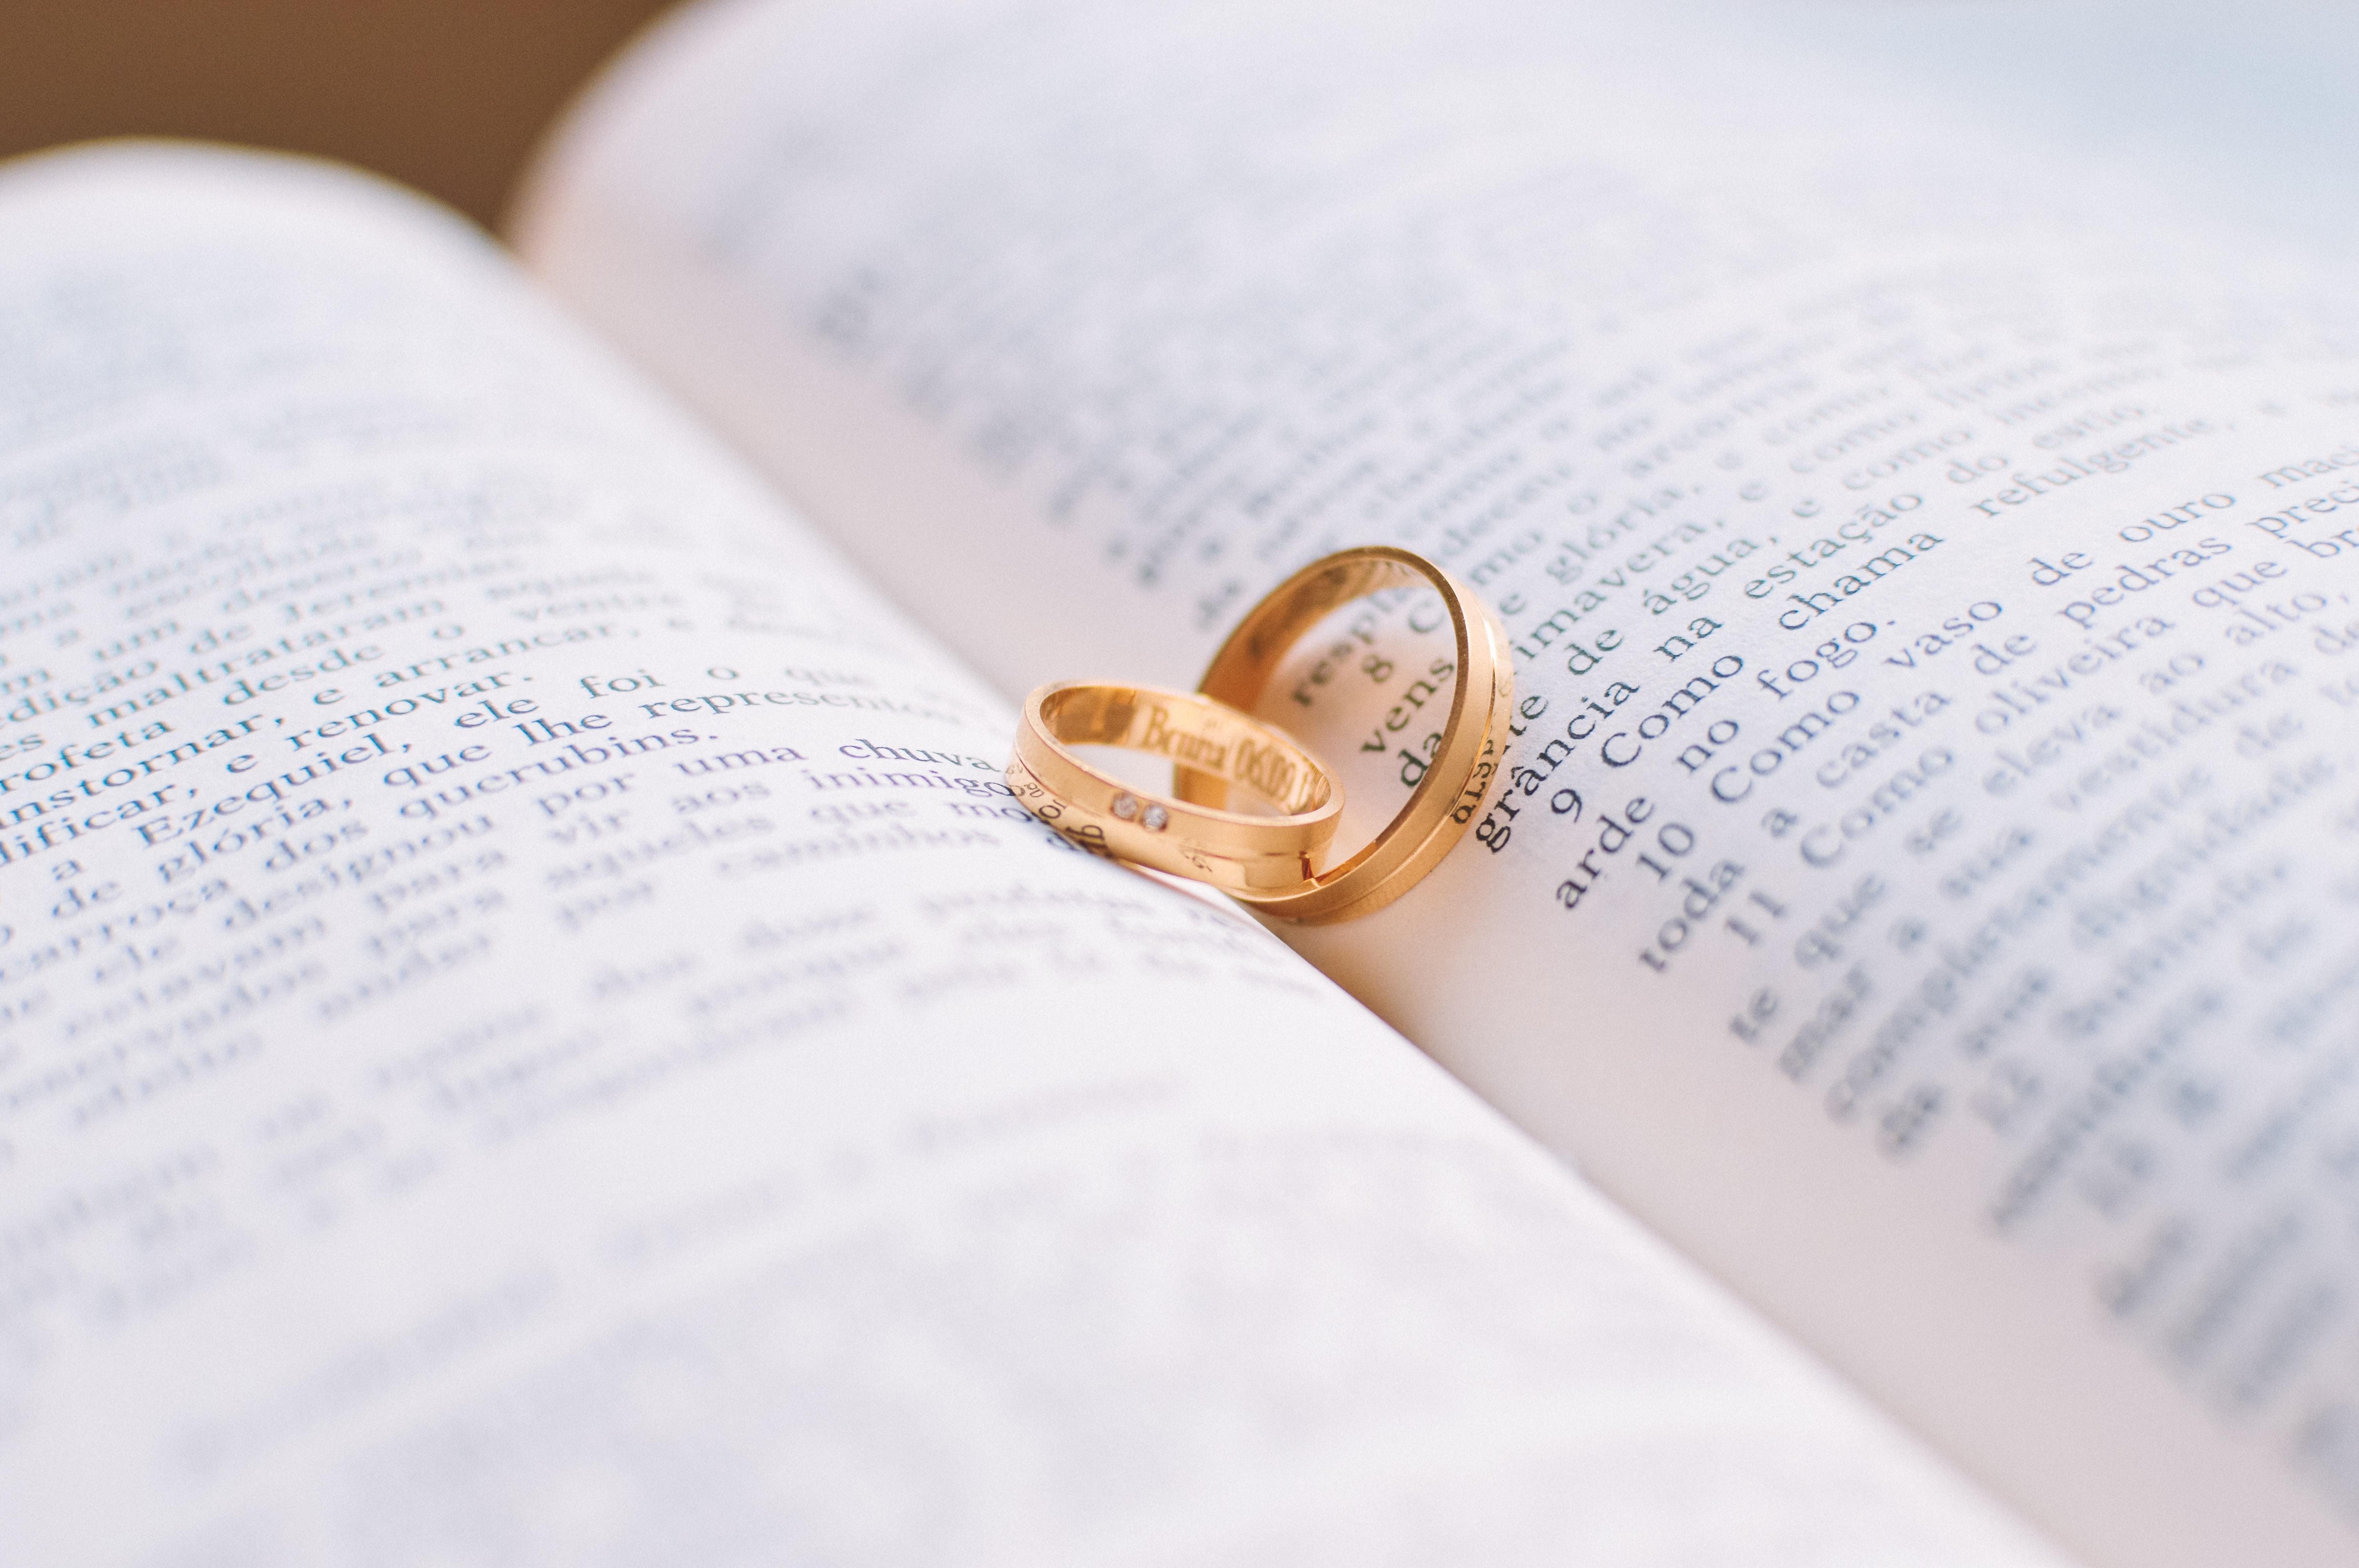 Two Gold Colored Wedding Bands On Book Page · Free